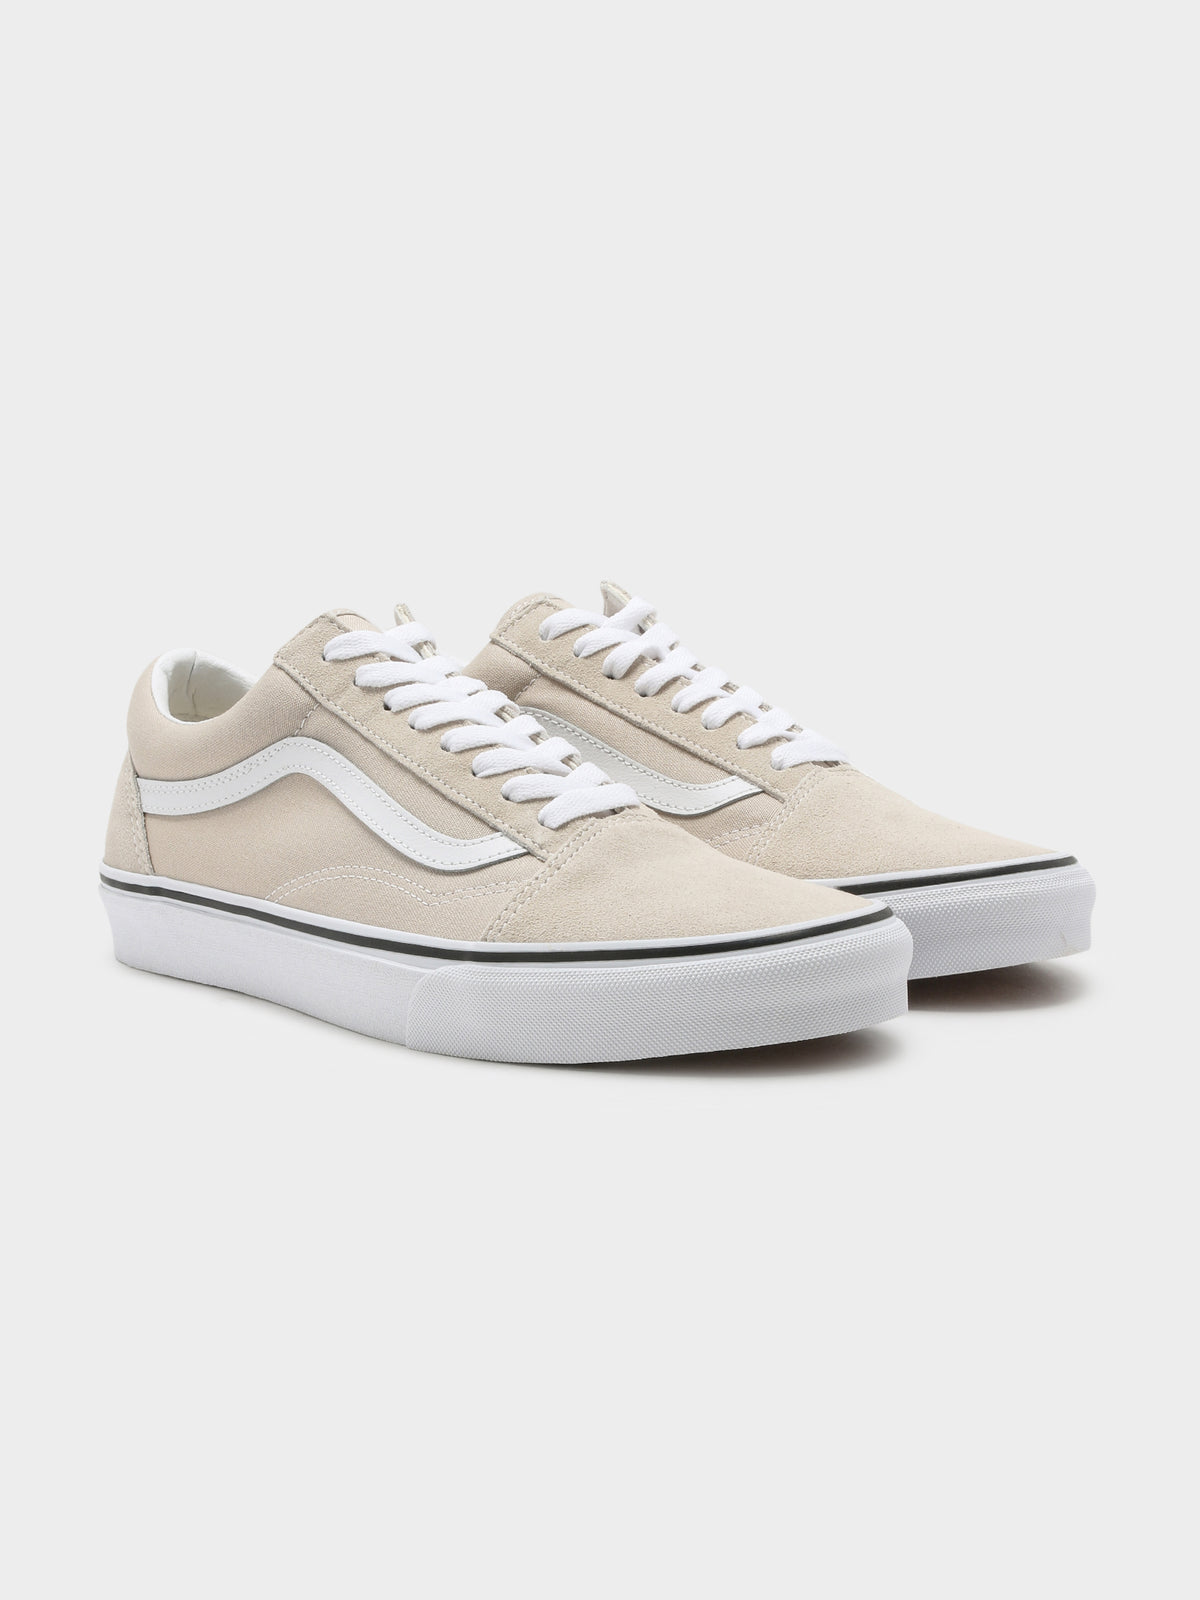 Unisex Old Skool Color Theory Sneakers in French Oak